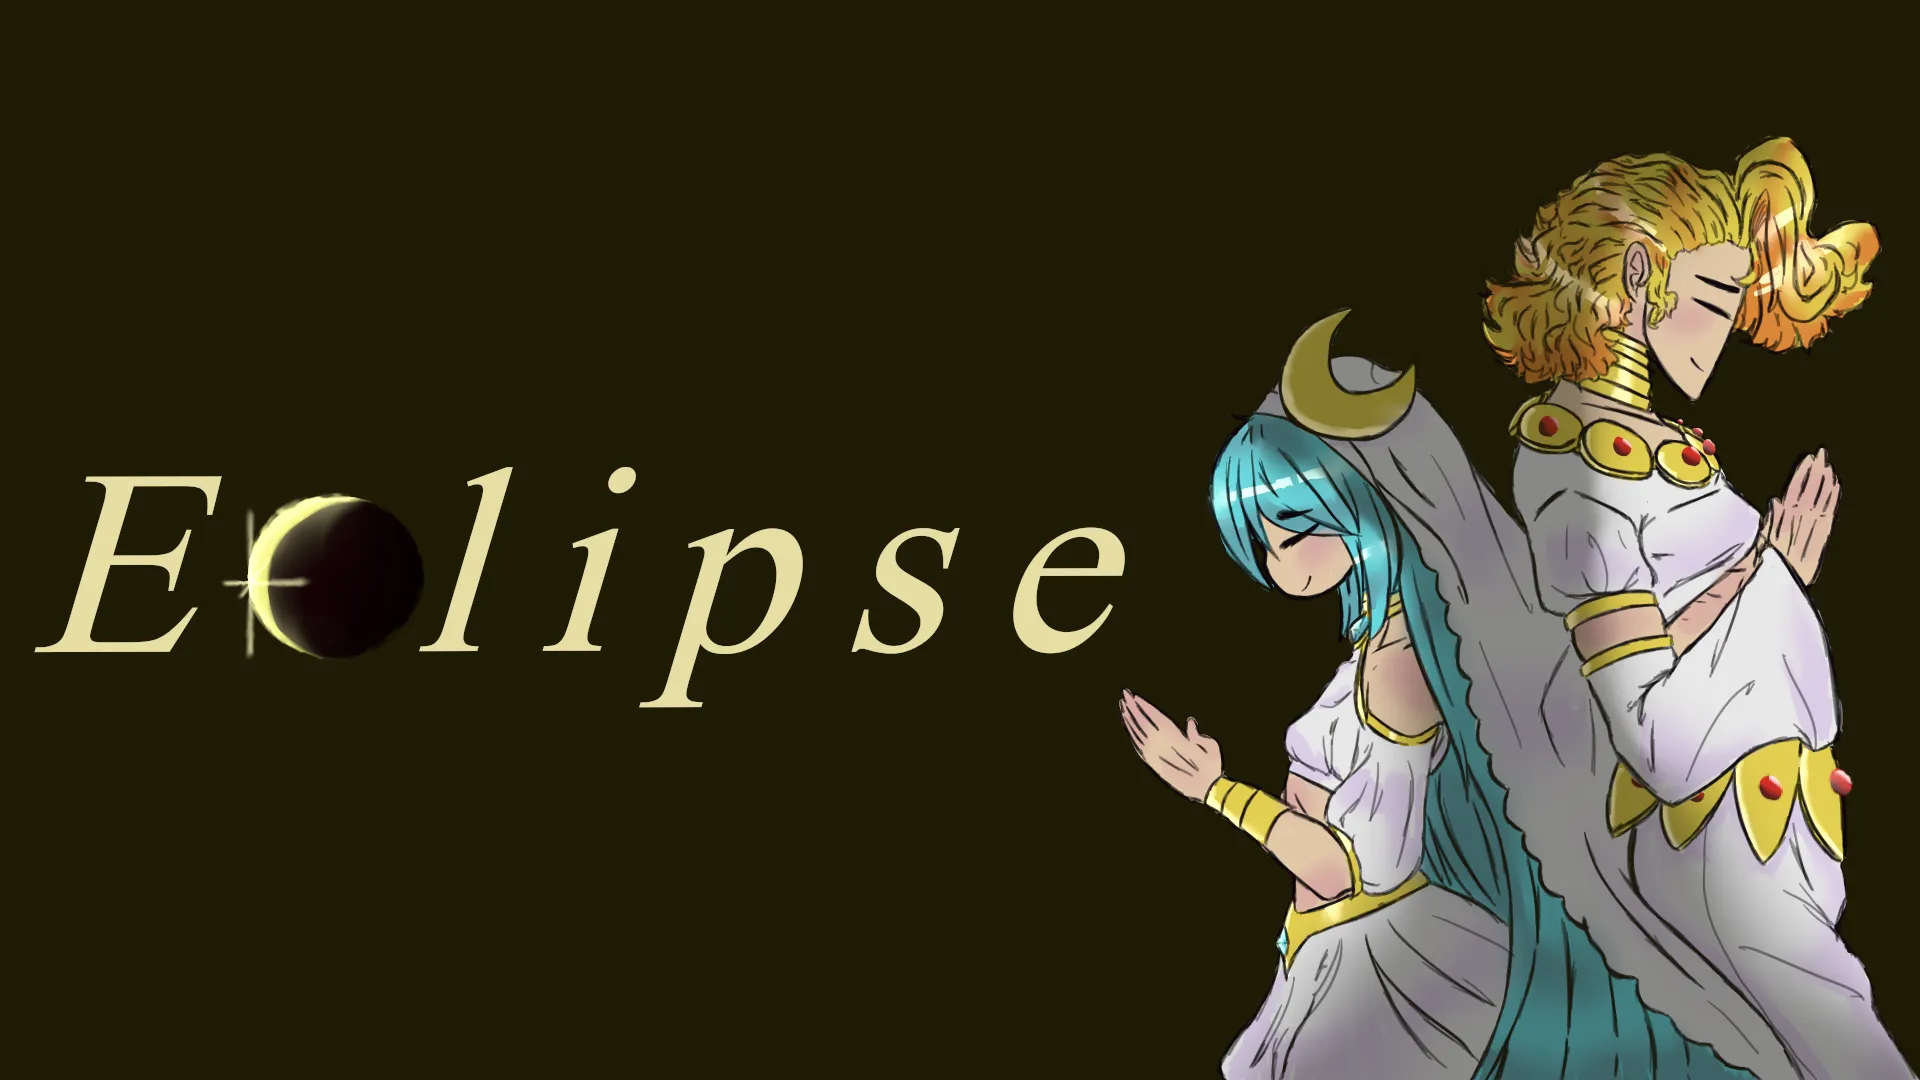 Cover for project Eclipse